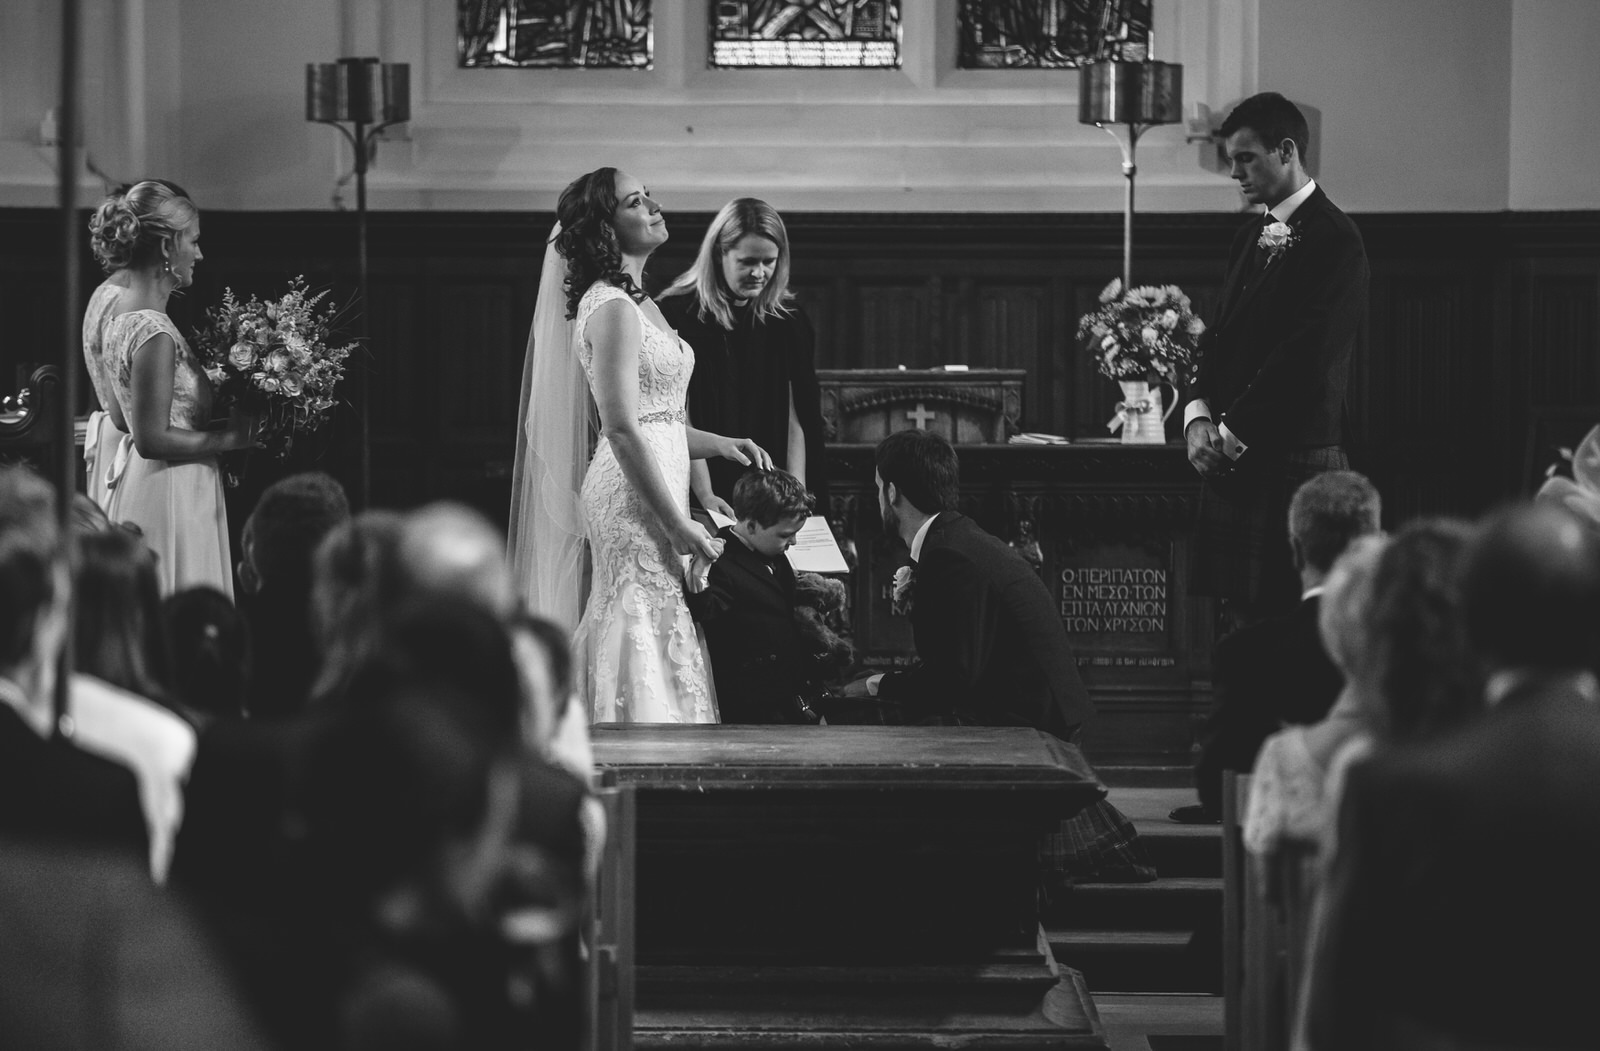  kings college aberdeen, wedding ceremony at kings college aberdeen, wedding photography aberdeen, aberdeen wedding photographers, wedding ceremony 